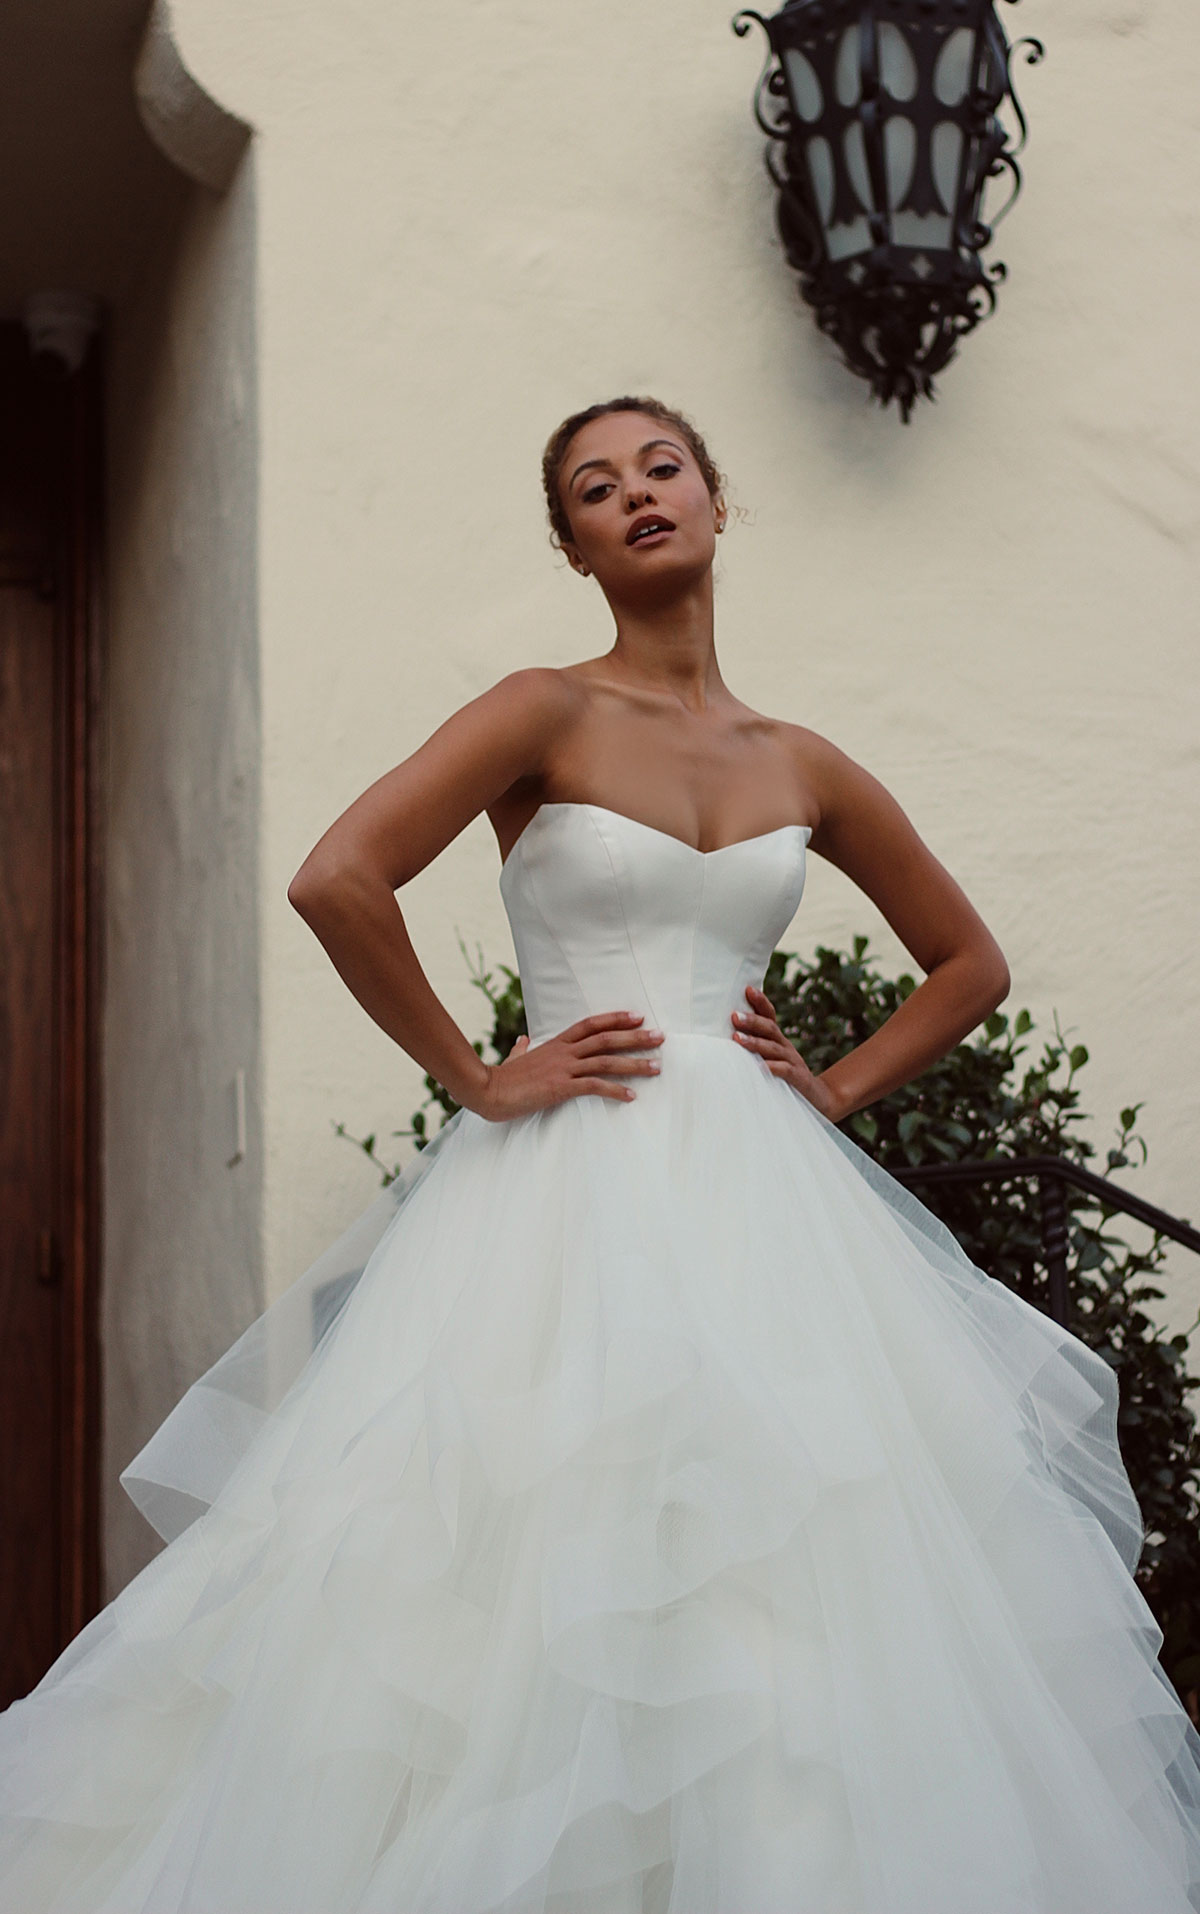 This Just In: Martina Liana Wedding Dressses - Bridal Accents Couture